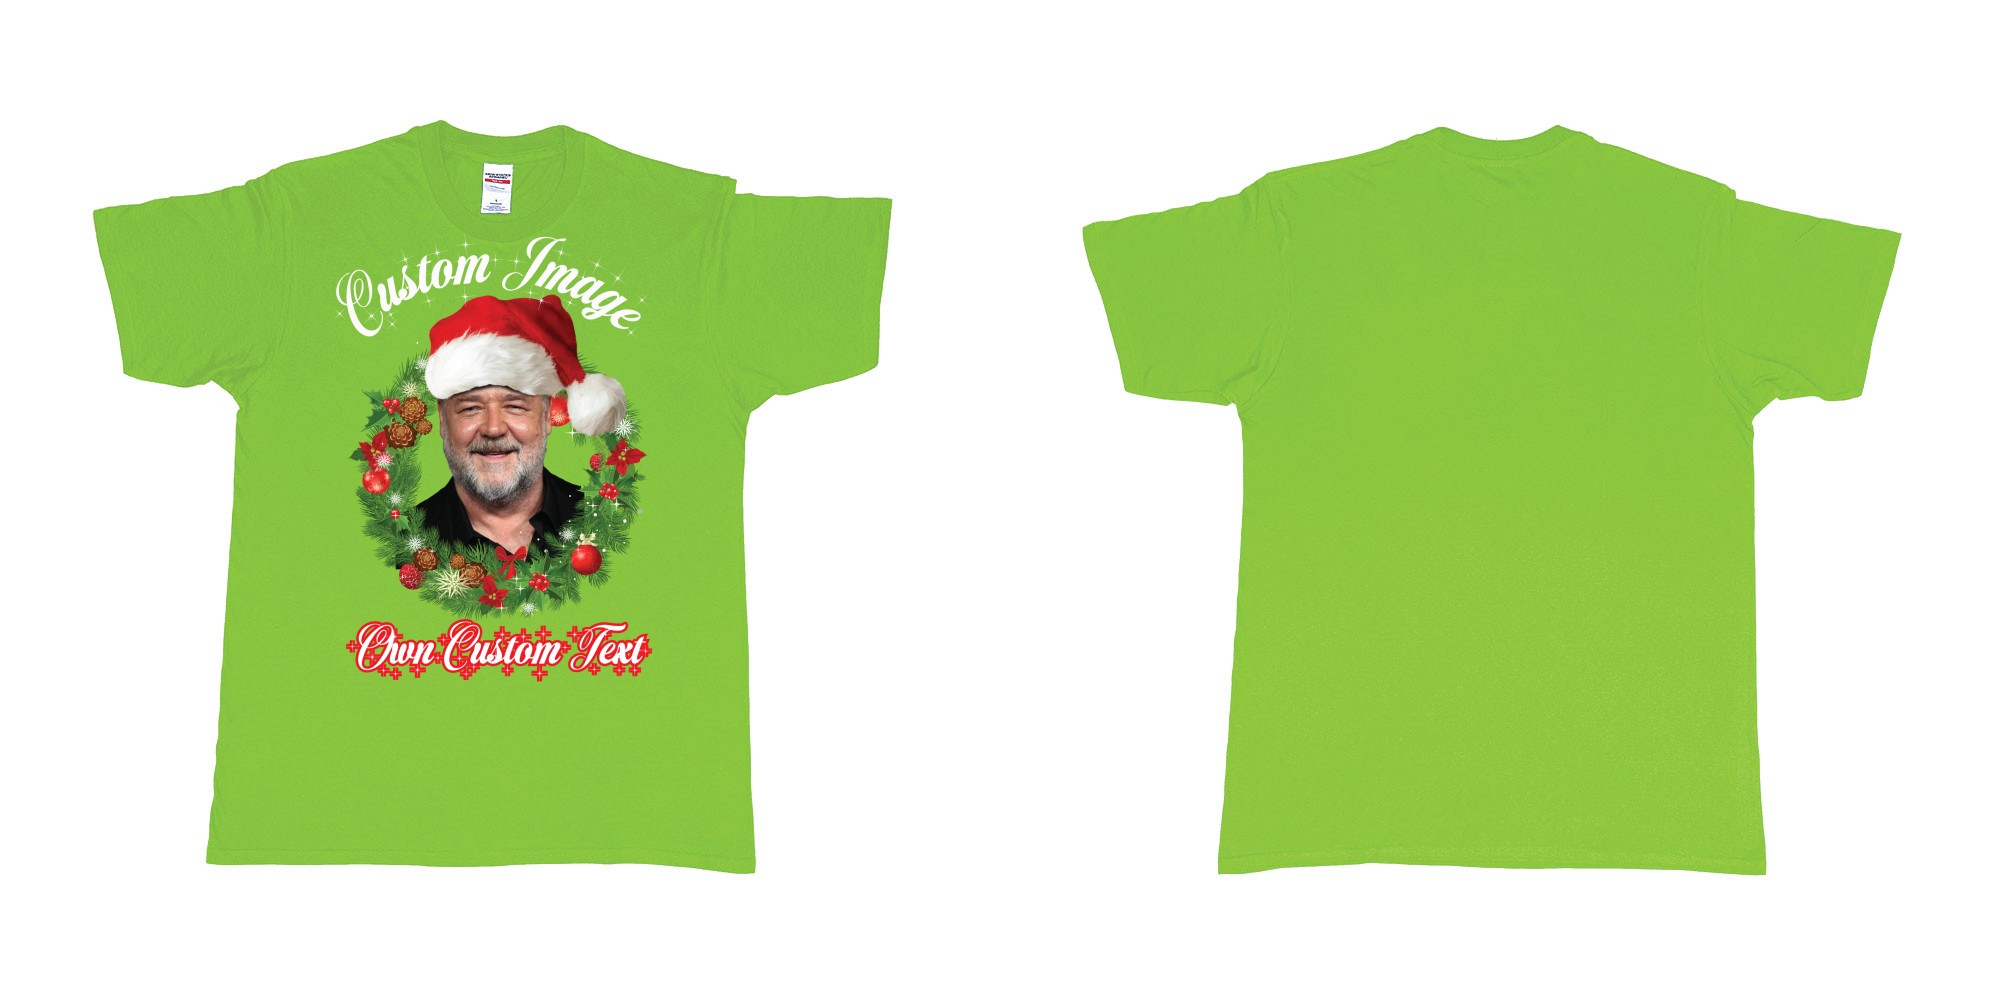 Custom tshirt design christmas wreath custom face image text in fabric color lime choice your own text made in Bali by The Pirate Way